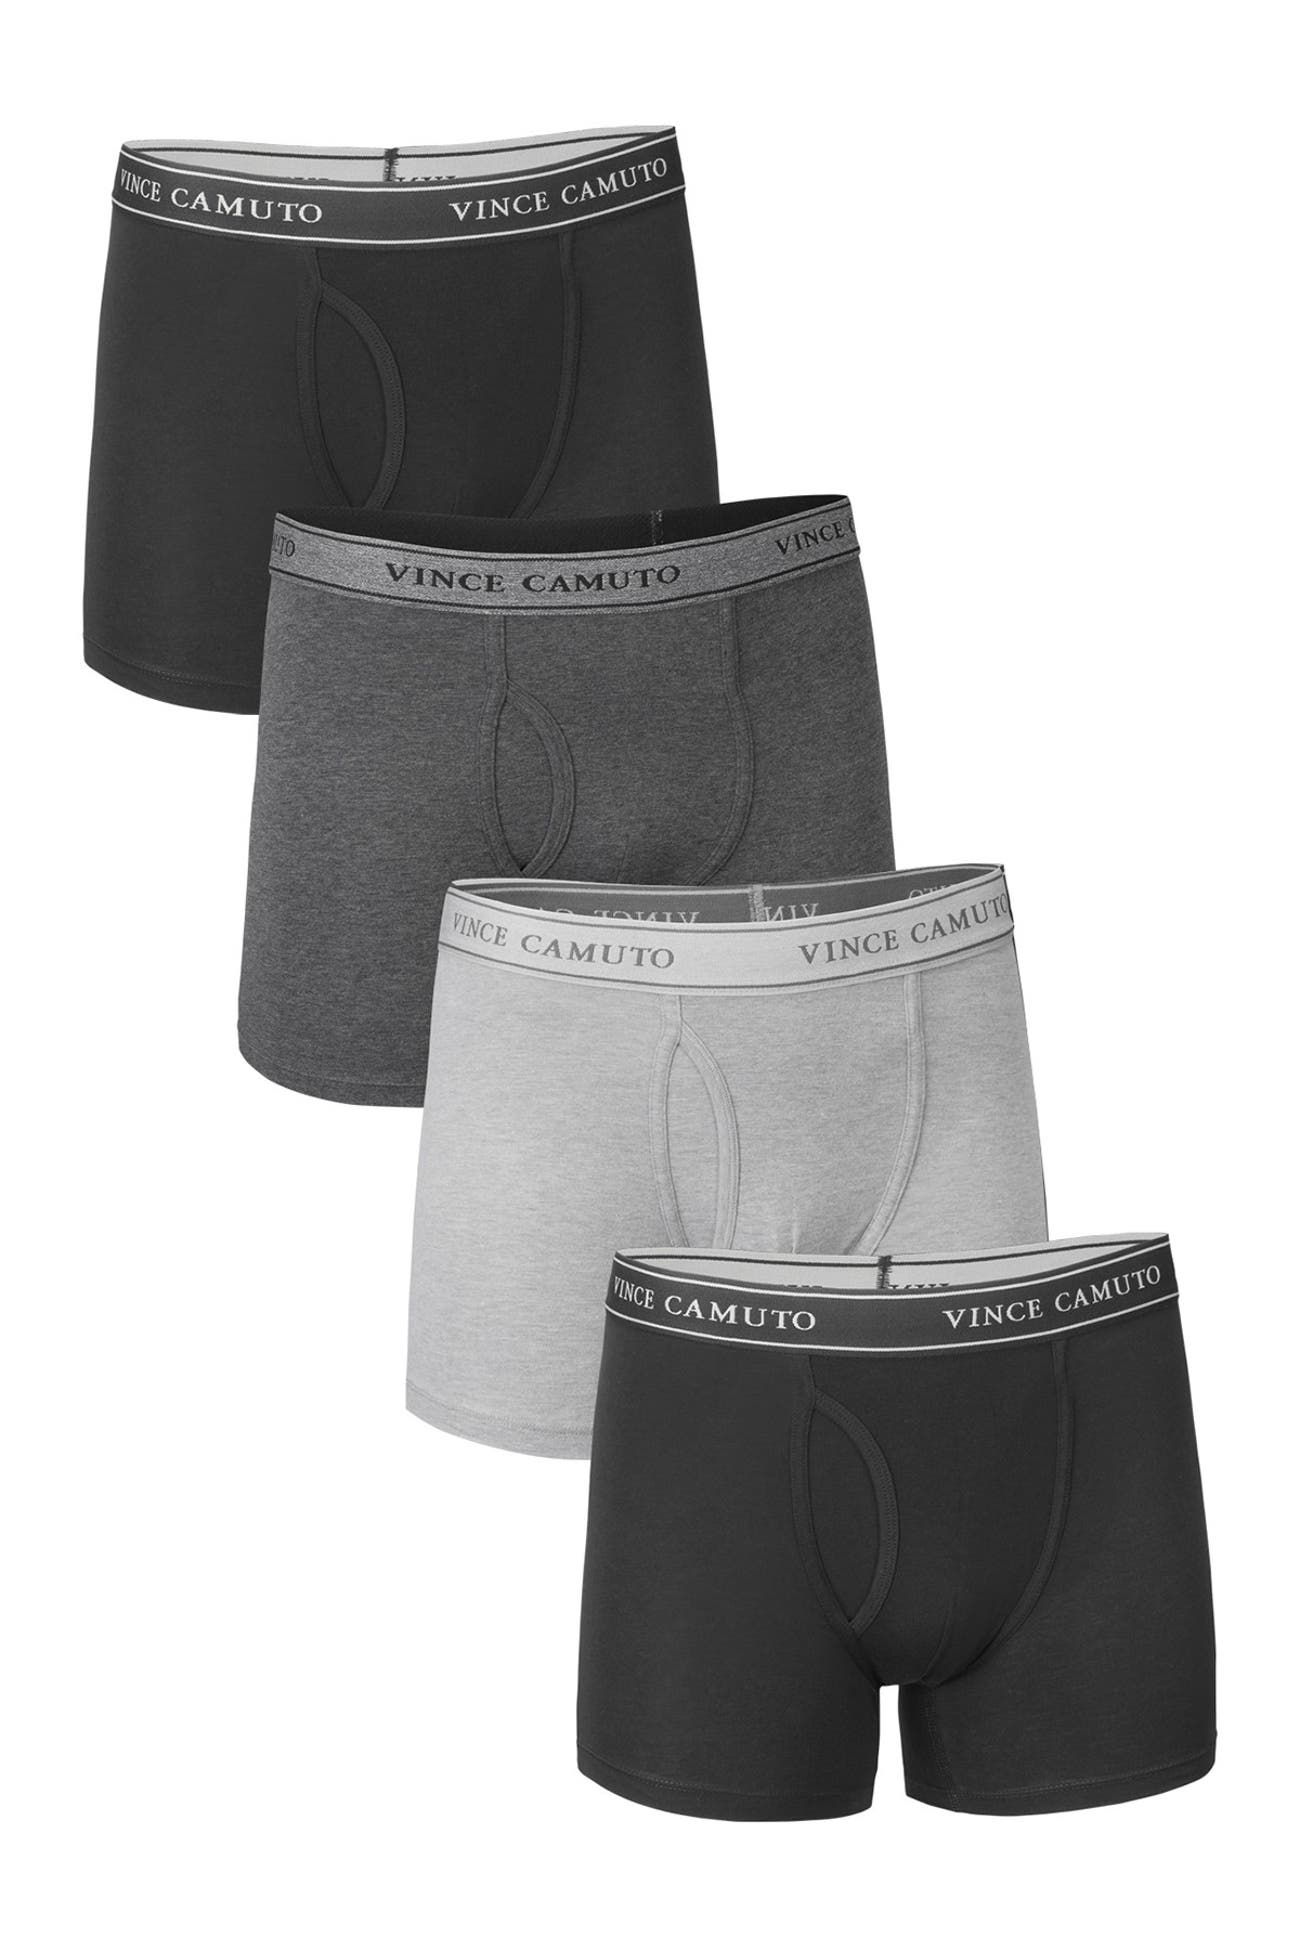 Vince Camuto | Stretch Boxer Briefs - Pack of 4 | Nordstrom Rack